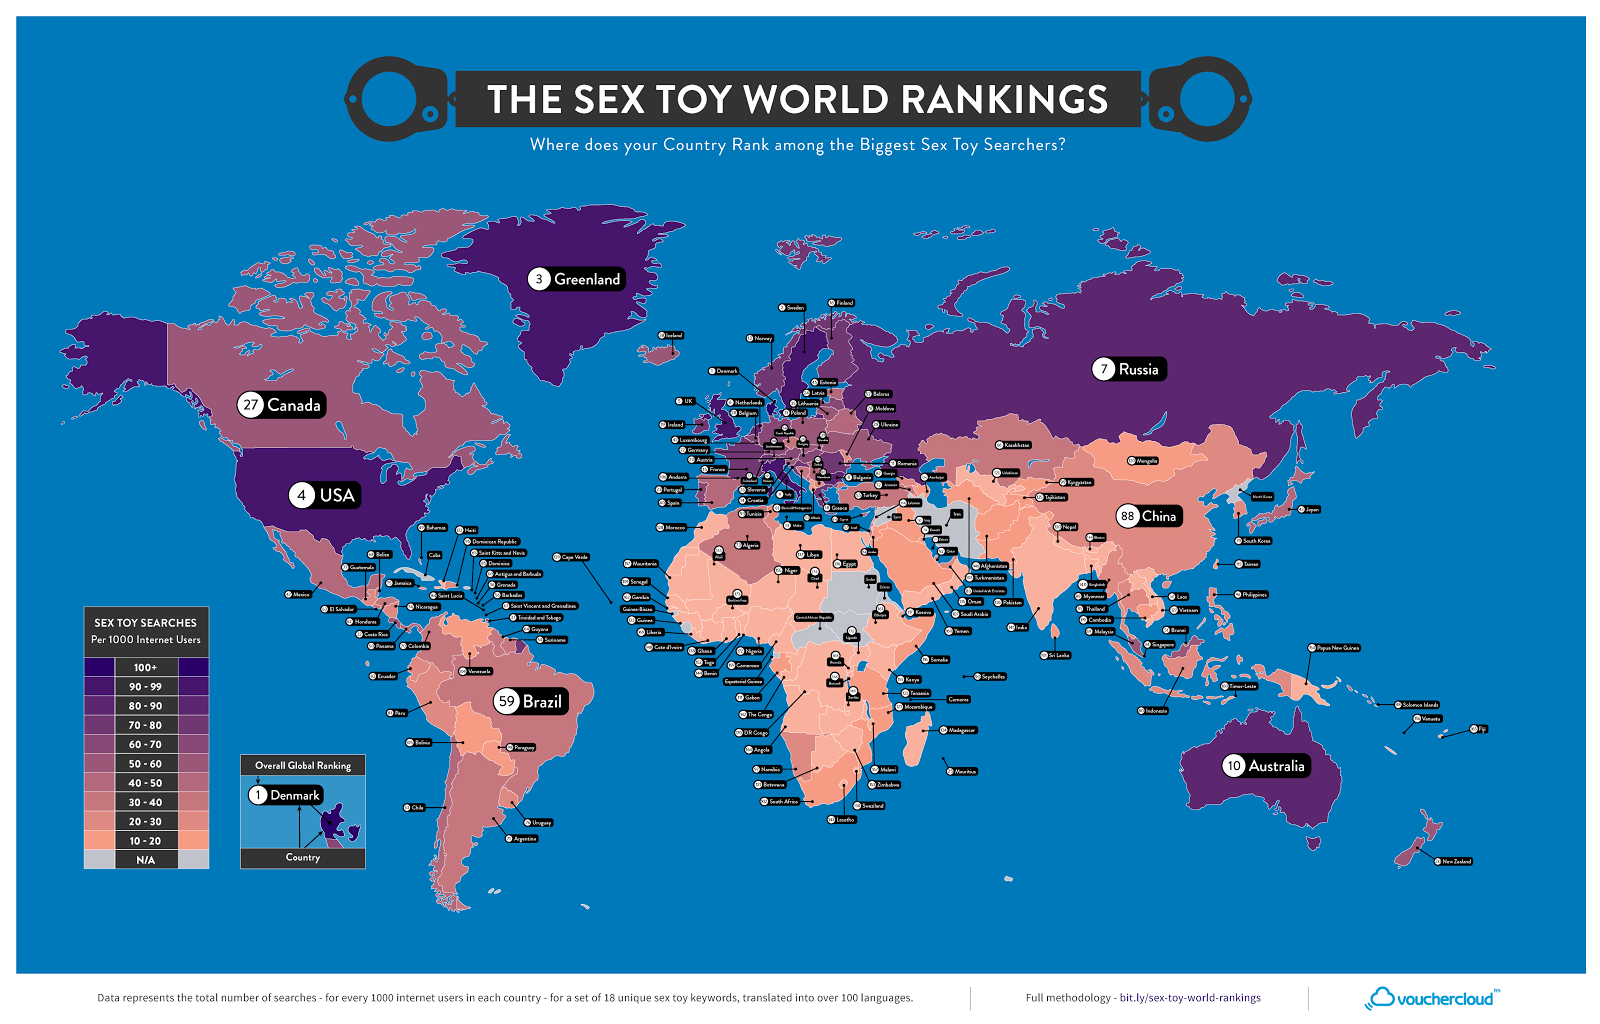 These Are The Countries That Search For Sex Toys The Most